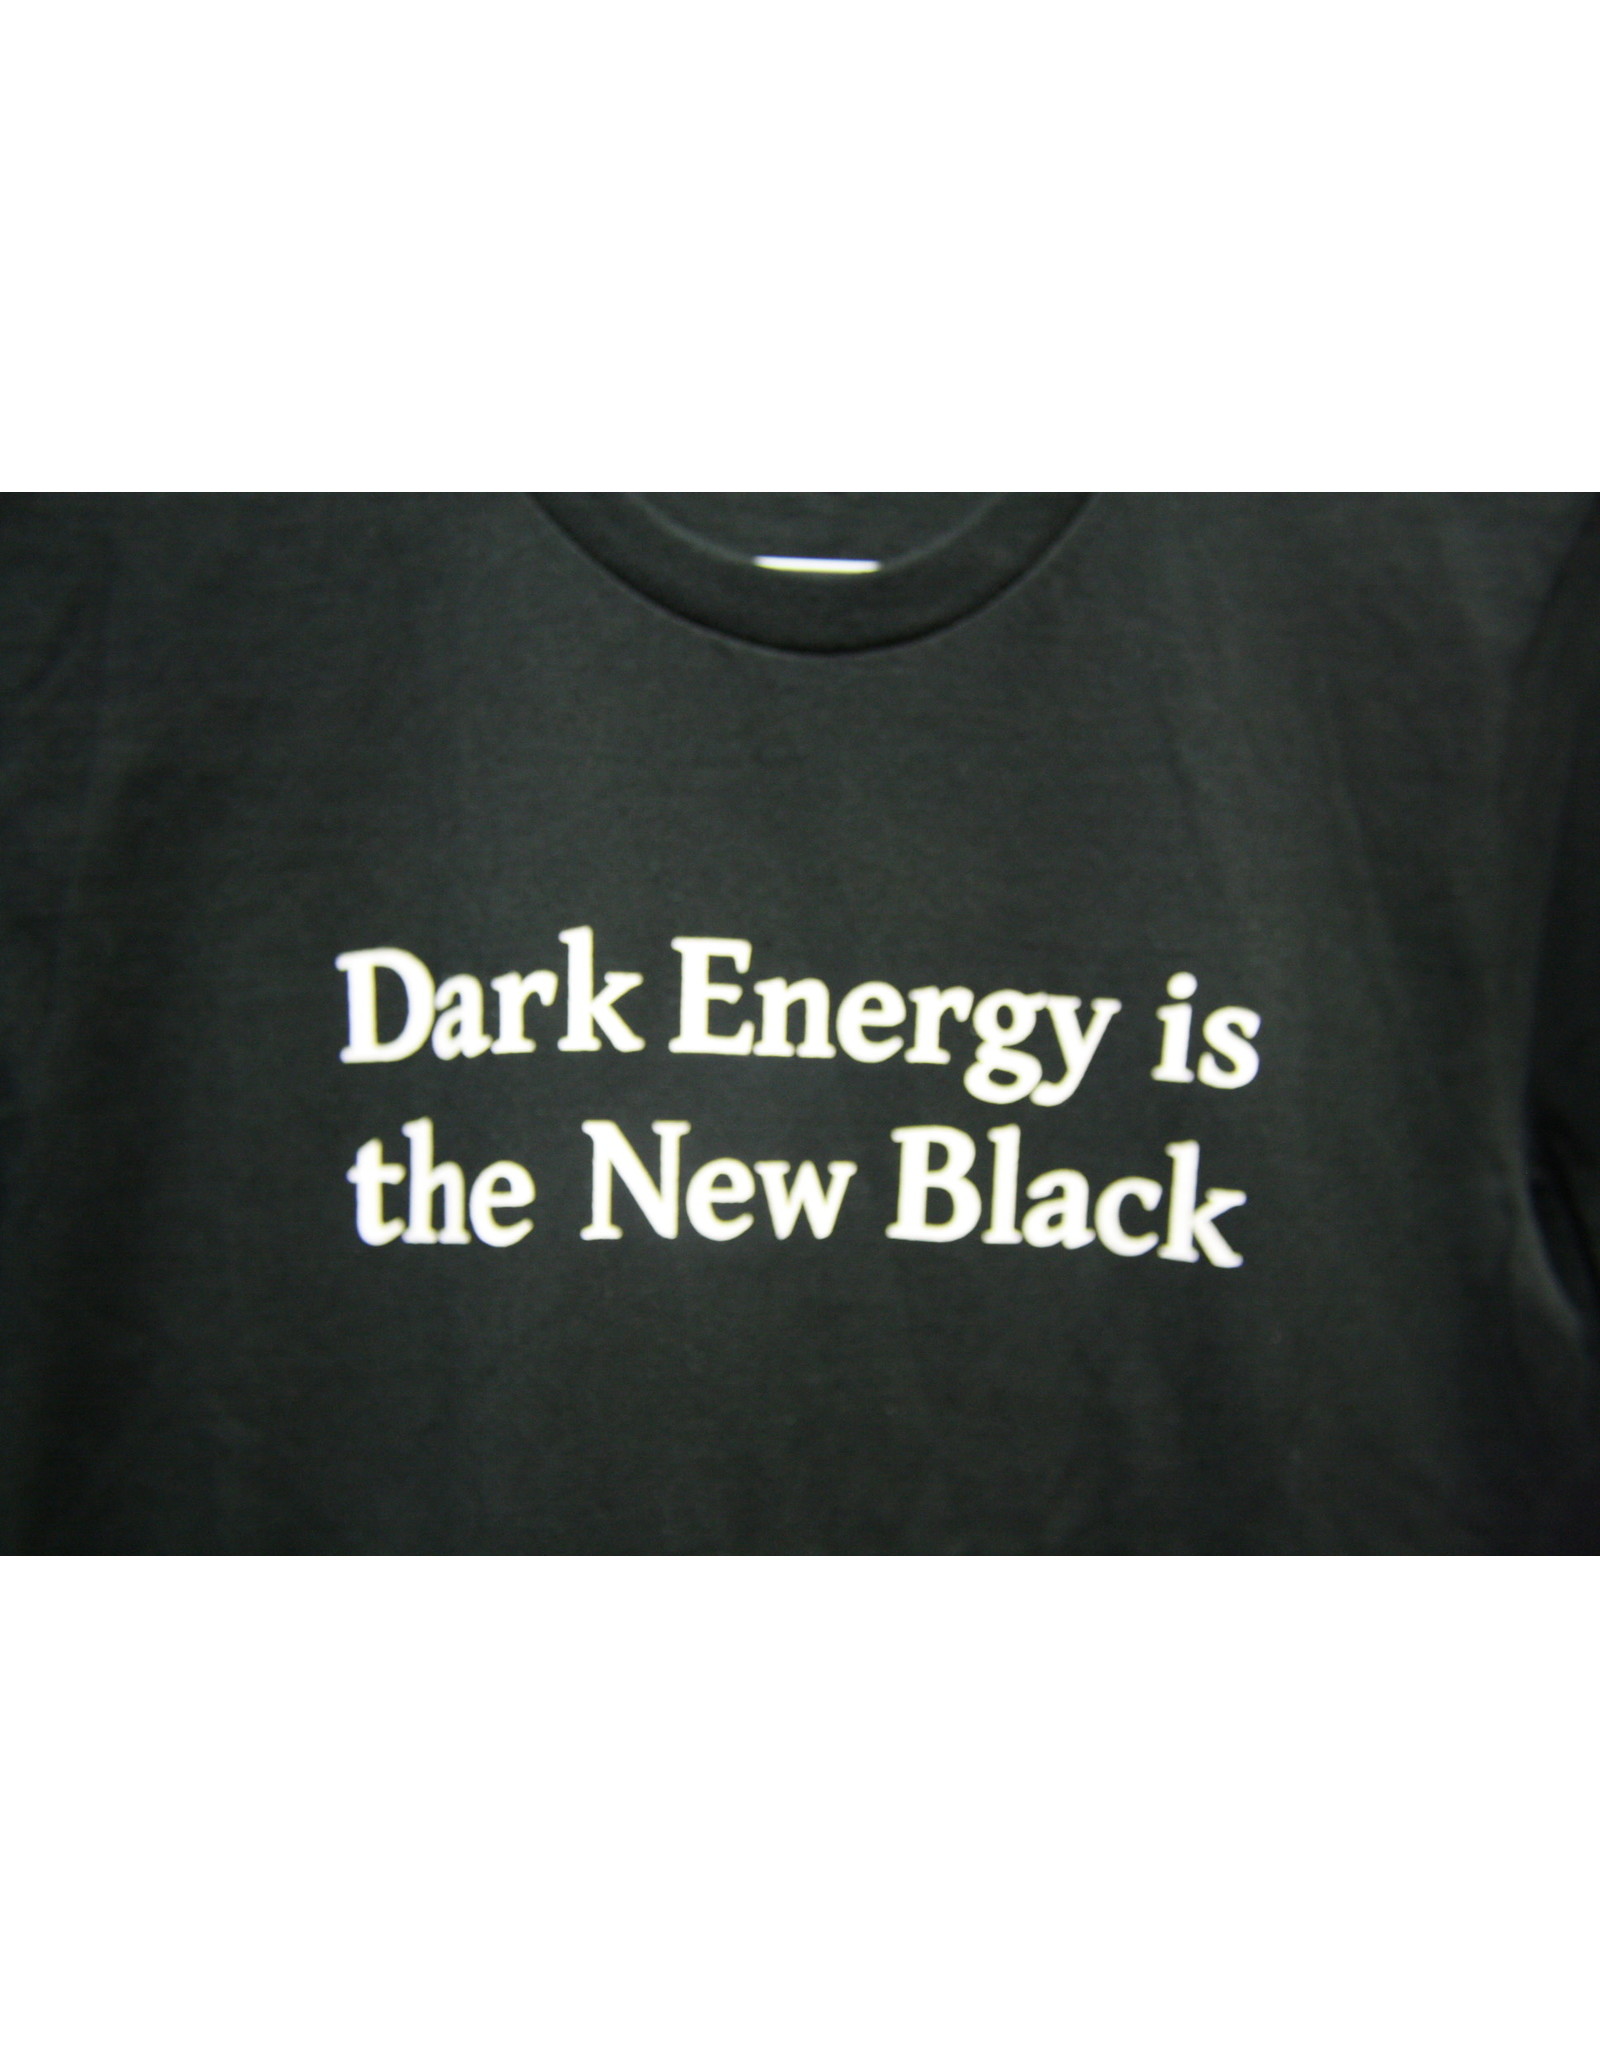 Dark Energy is the New Black T Shirt (Specify Size)